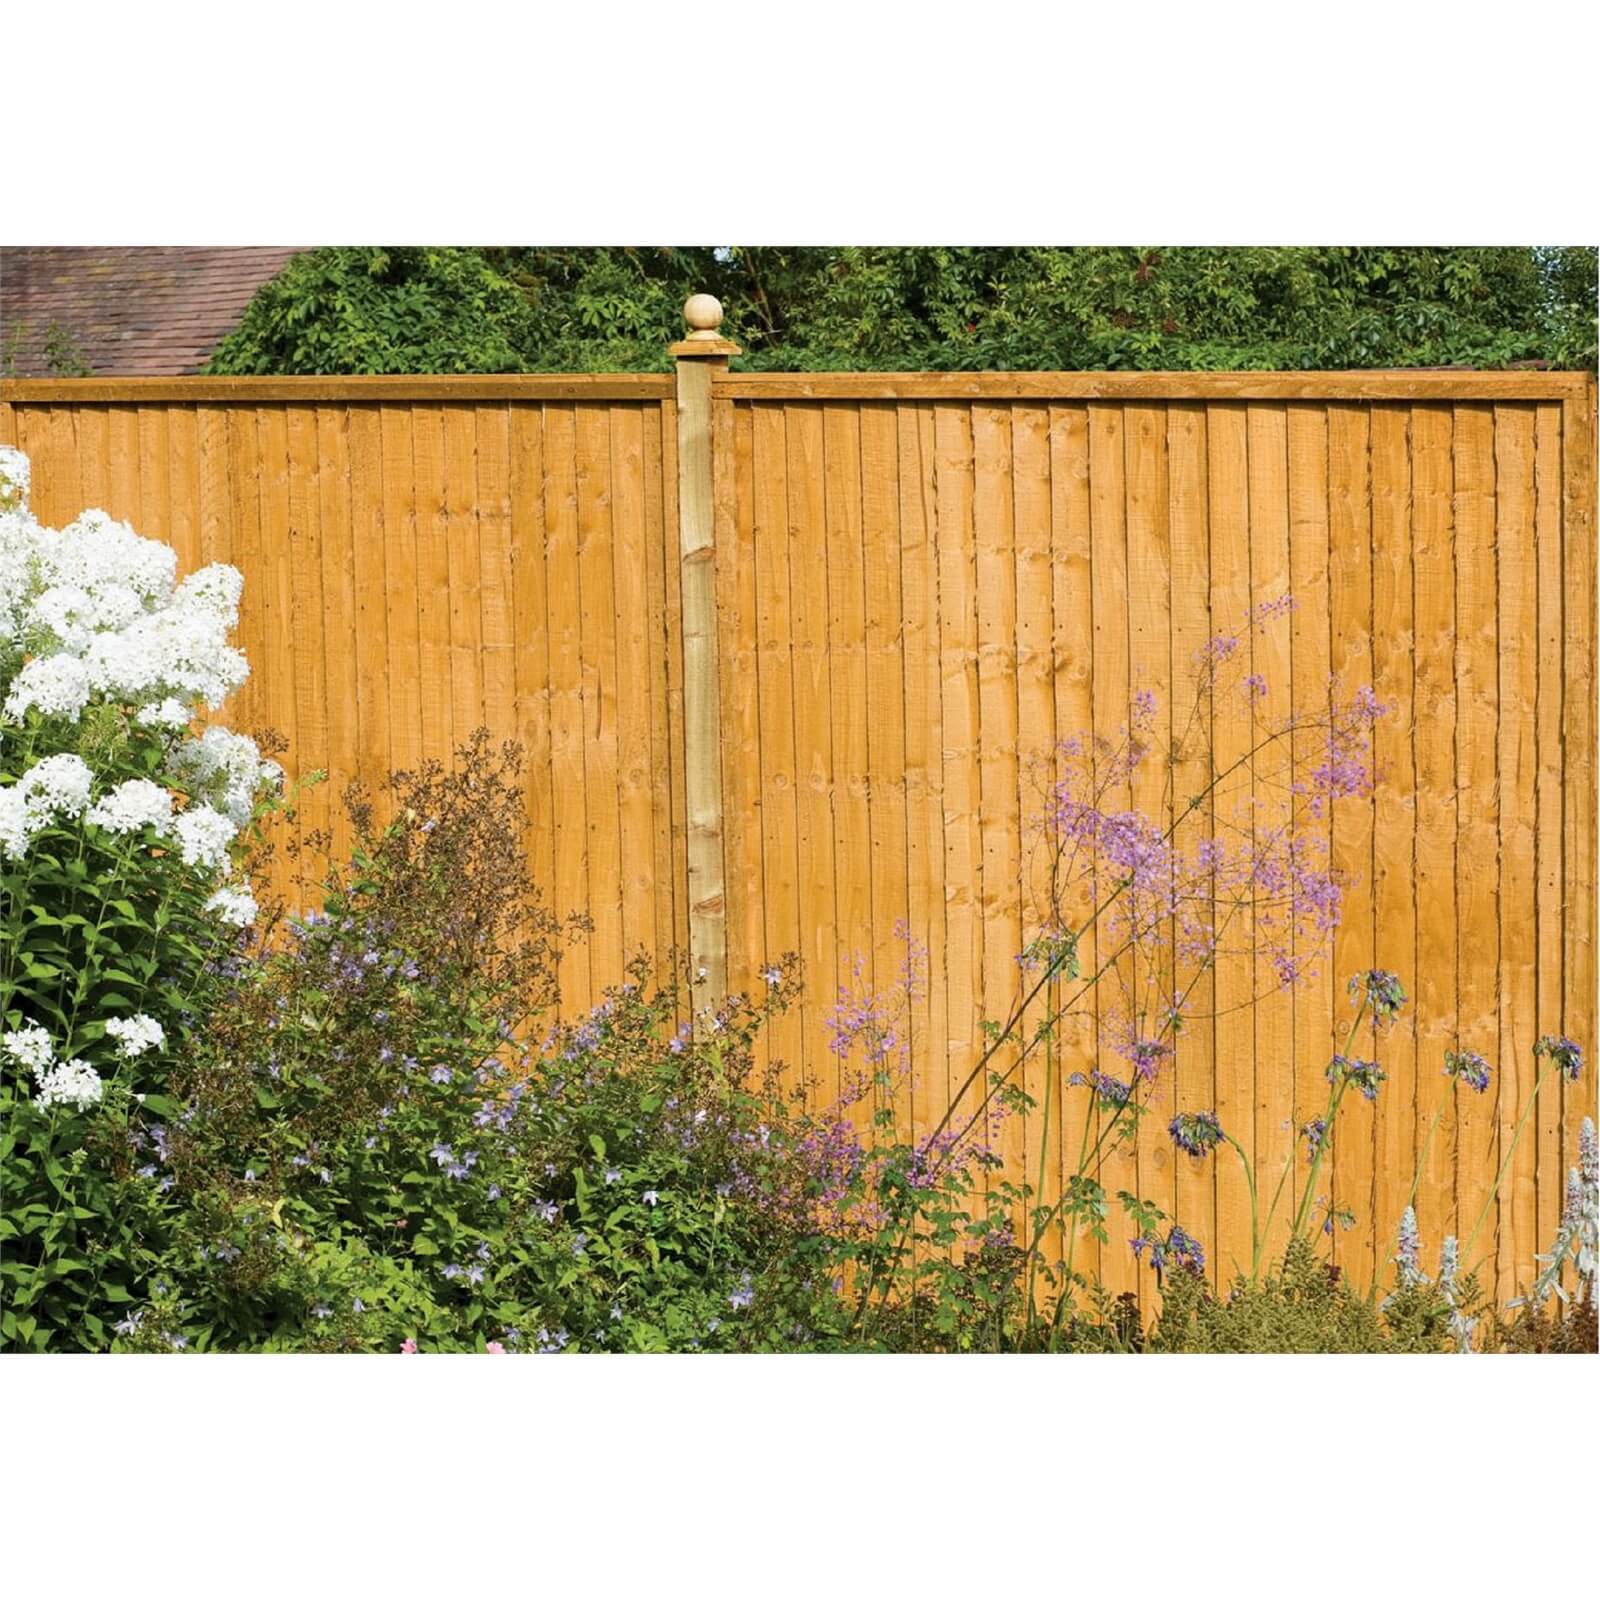 Forest Larchlap Closeboard 1.2m Fence Panel - Pack of 4